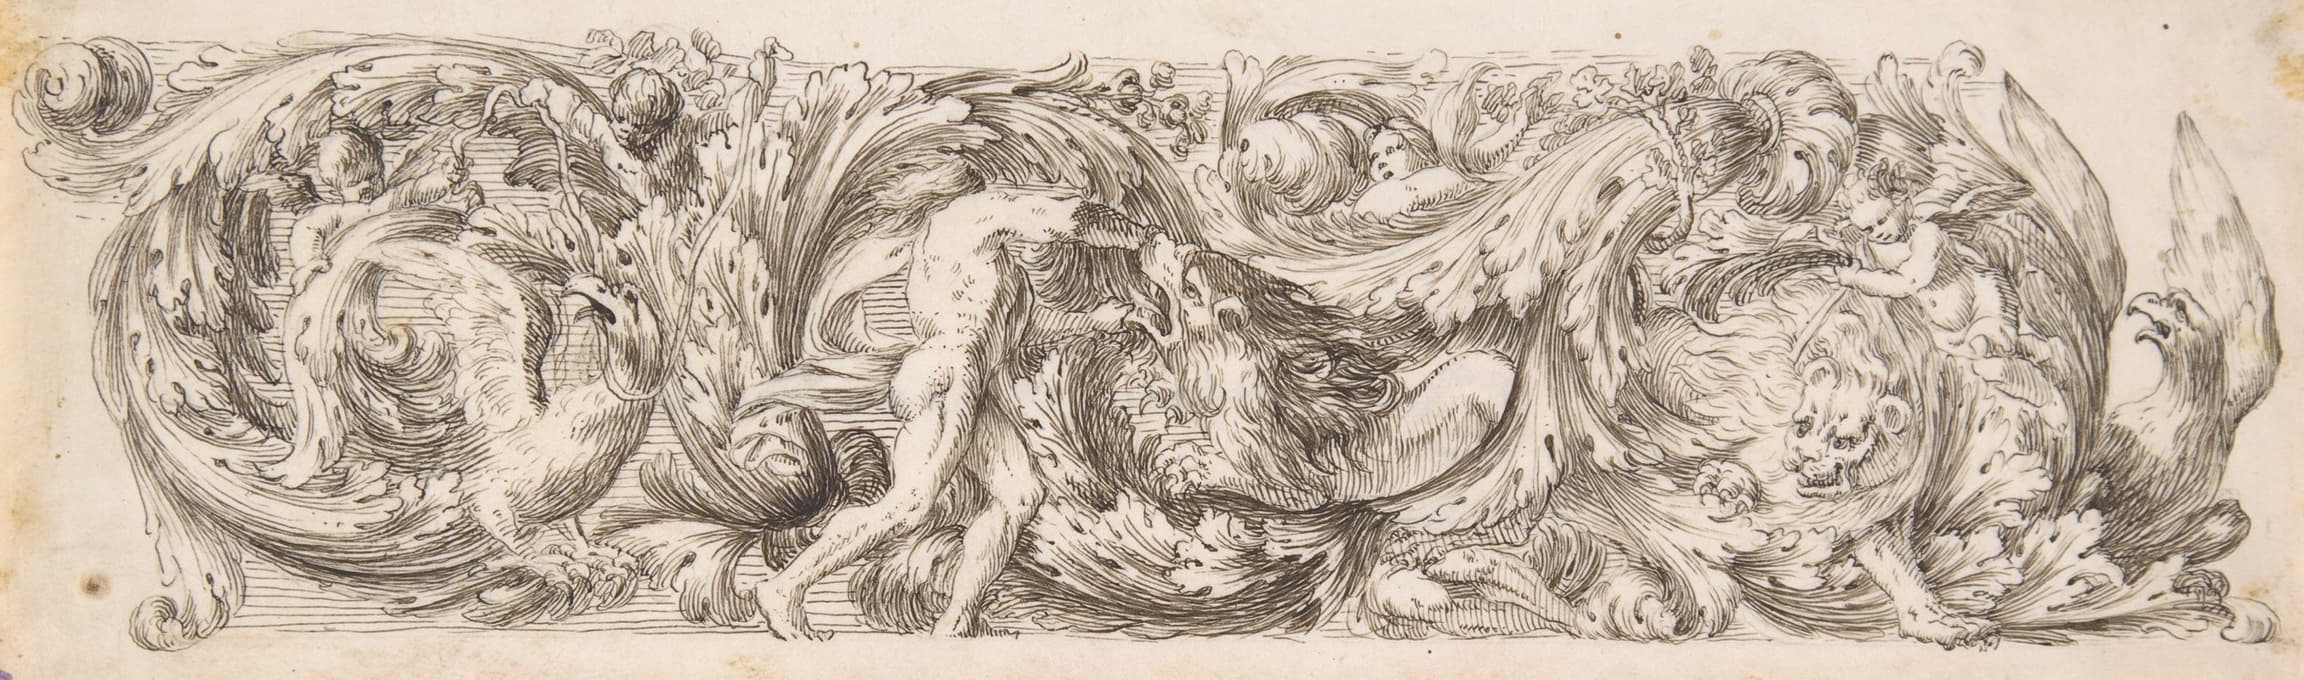 Jean Le Pautre - Frieze with Acanthus Scrolls and a Man fighting a Lion